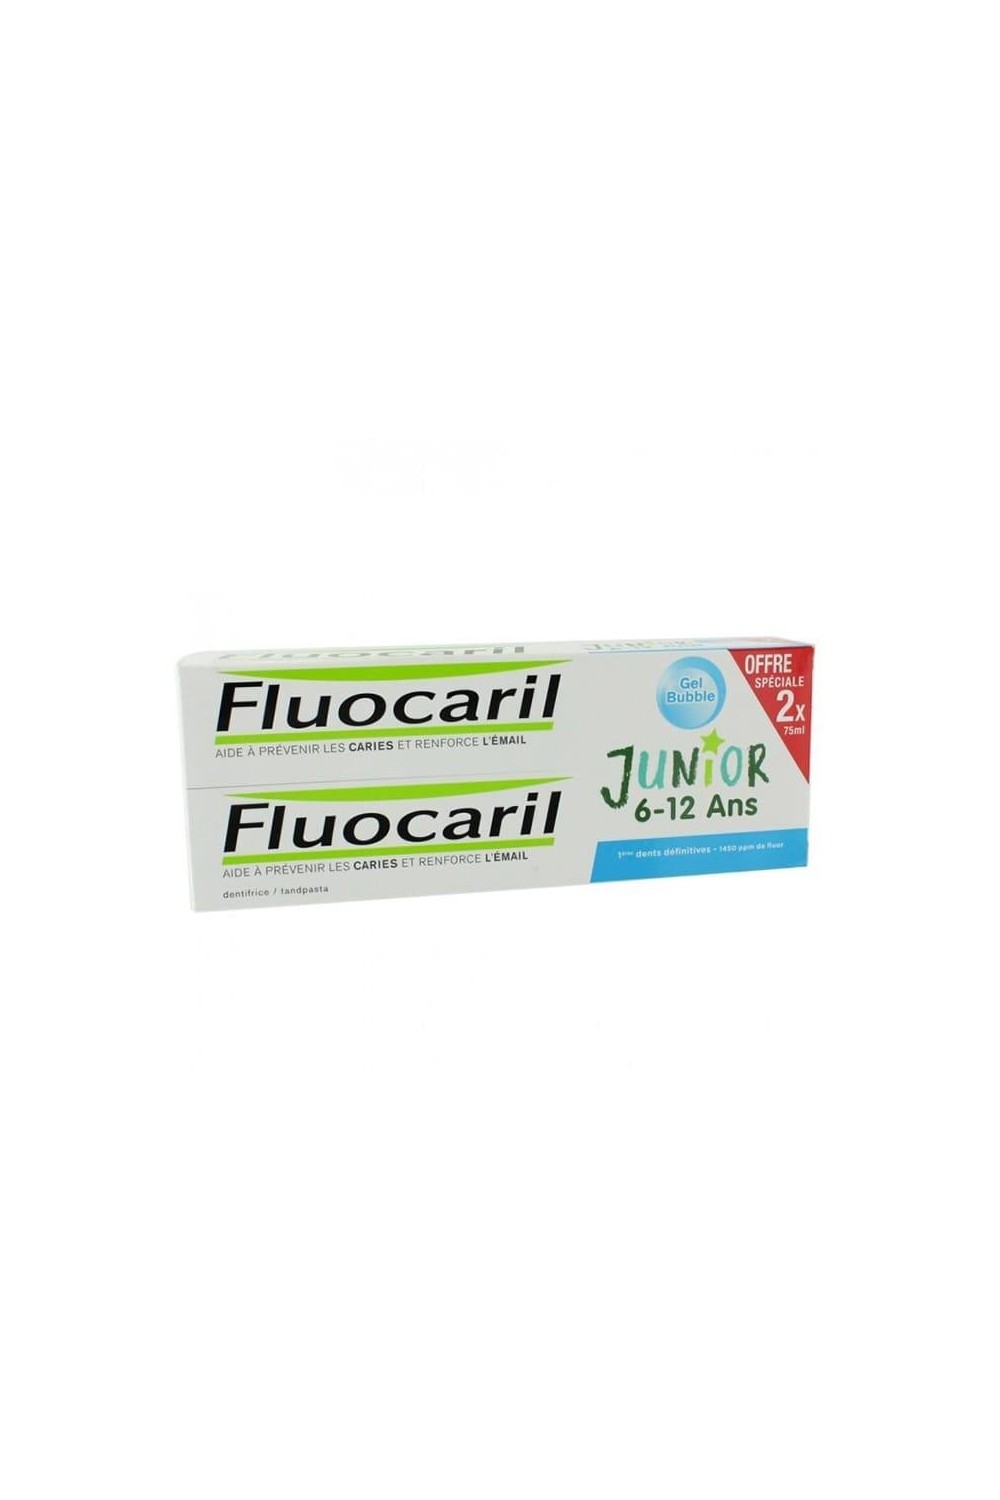 Fluocaril® Junior 6-12 Years Pack Bubble Flavour Toothpaste 2x 75ml